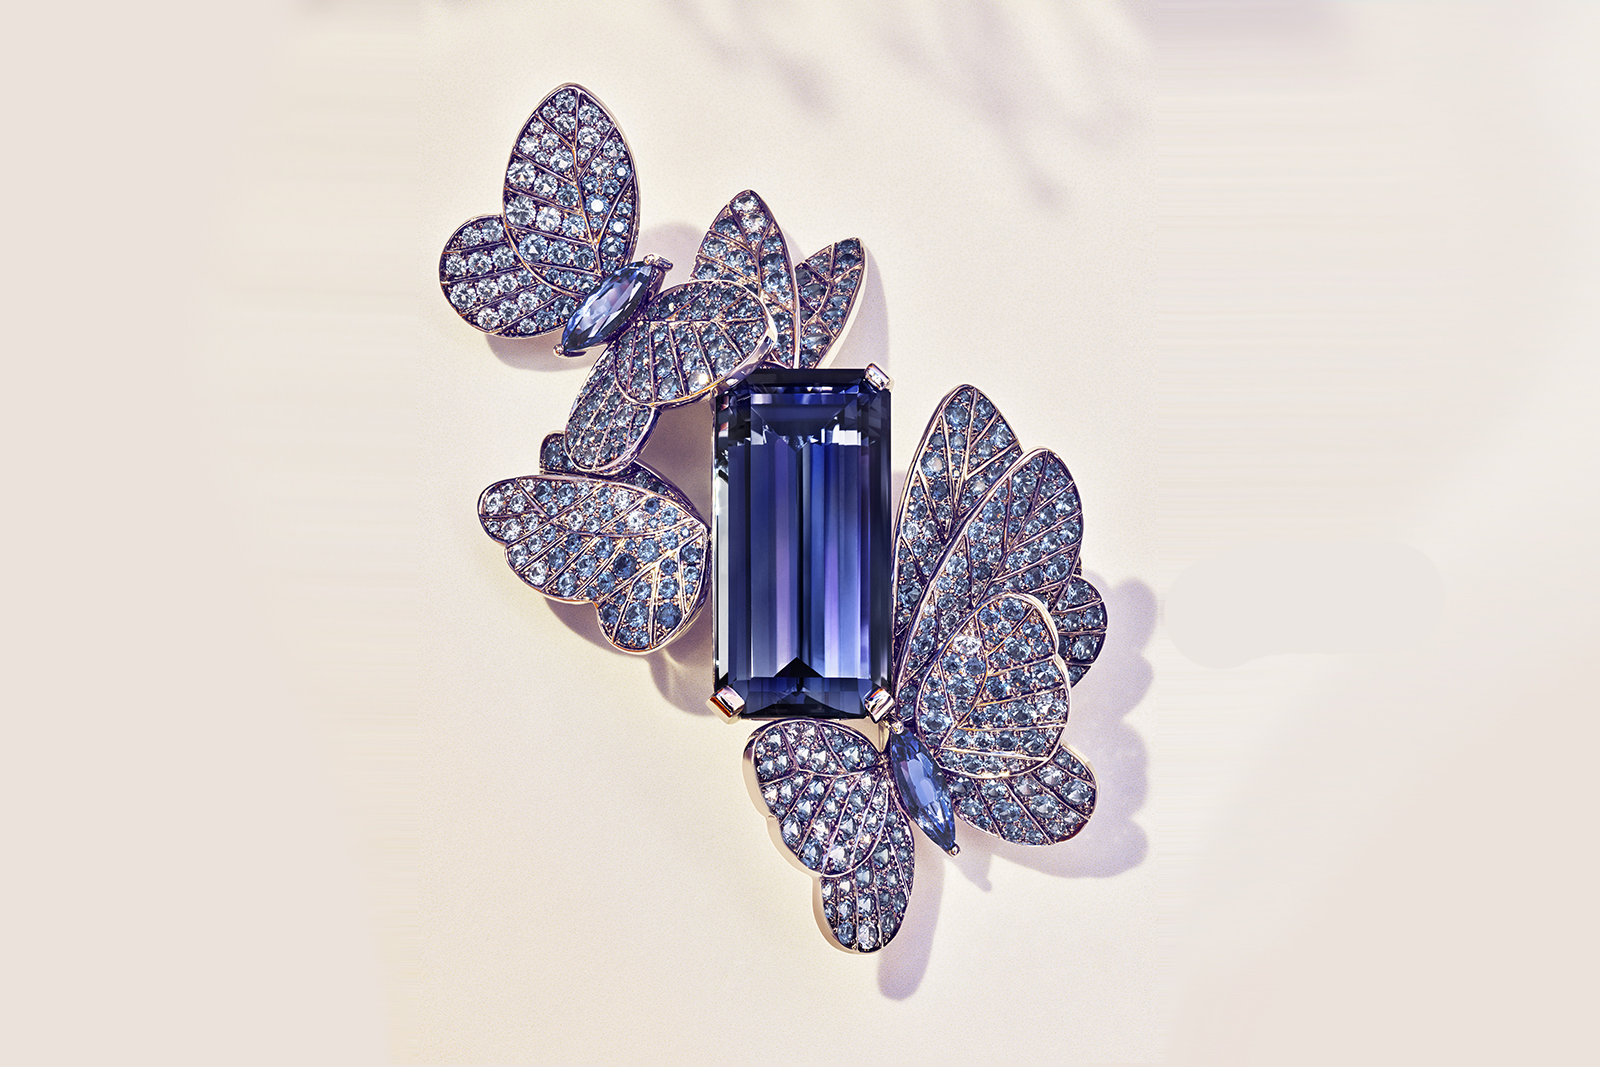 Tiffany & Co. Blue Book 2018 collection brooch in platinum with an emerald-cut tanzanite of over 27 carats, round and marquise sapphires, over five total carats, and round brilliant diamonds